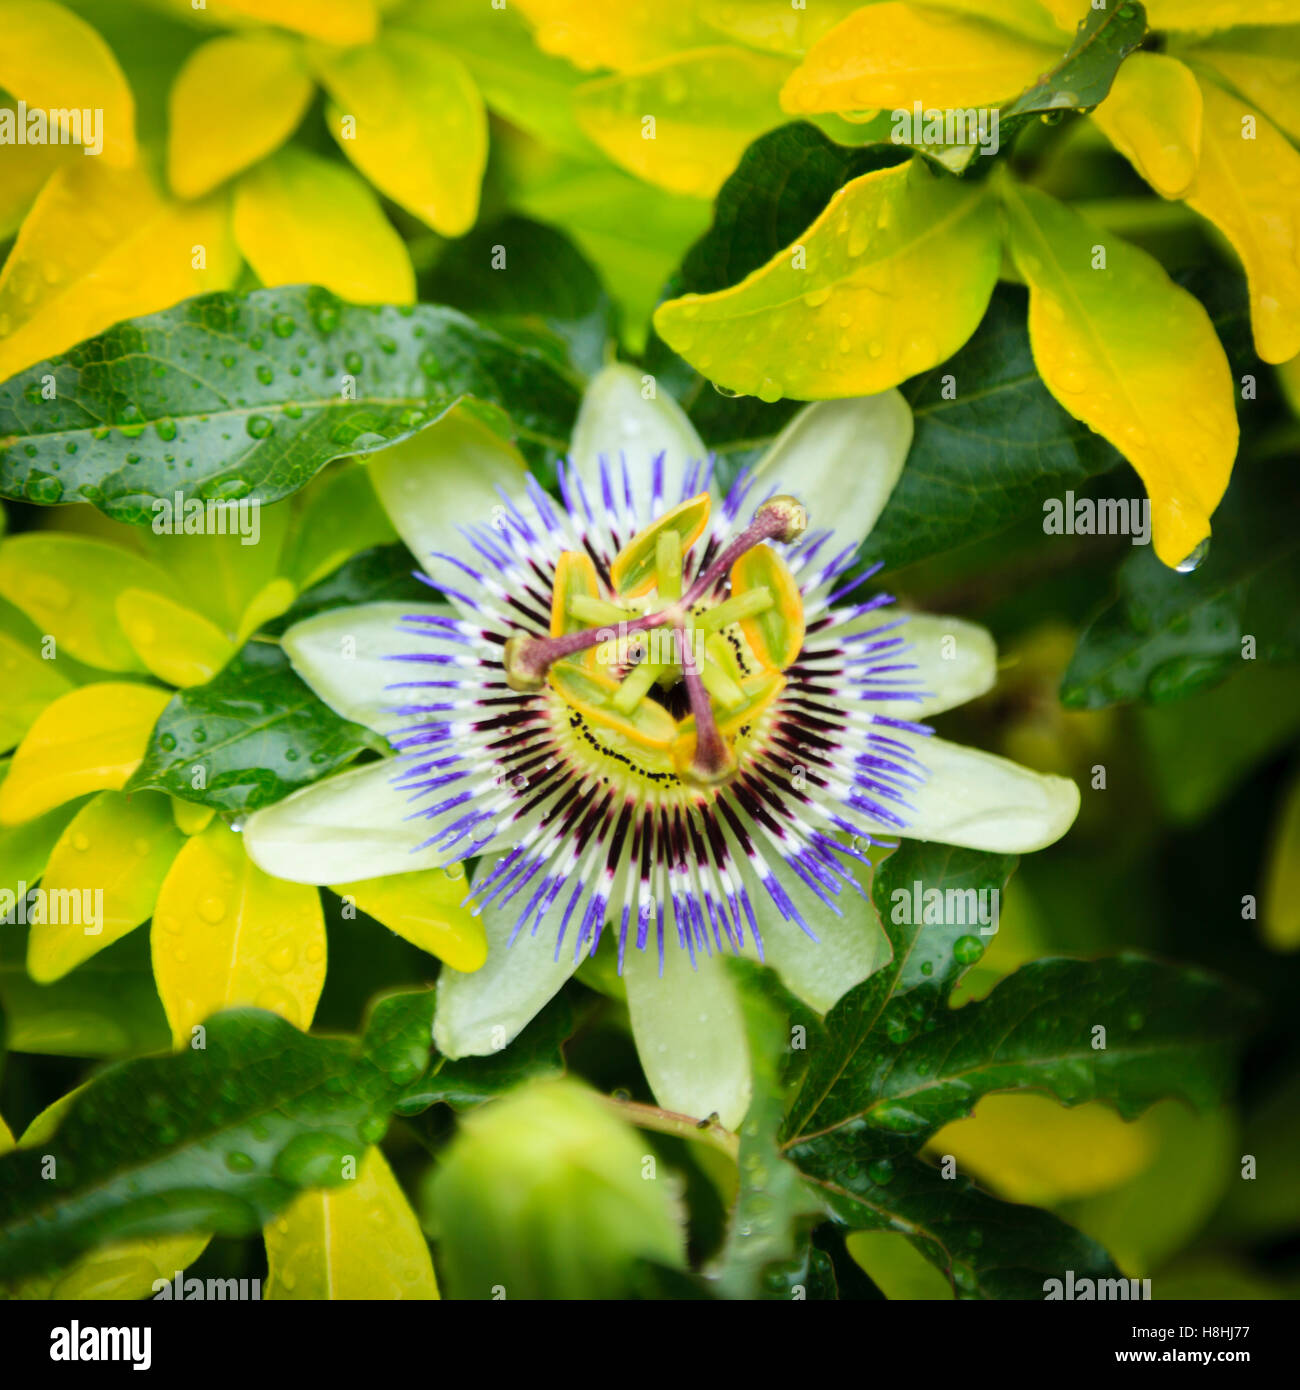 The flower of the Passion Fruit . Stock Photo